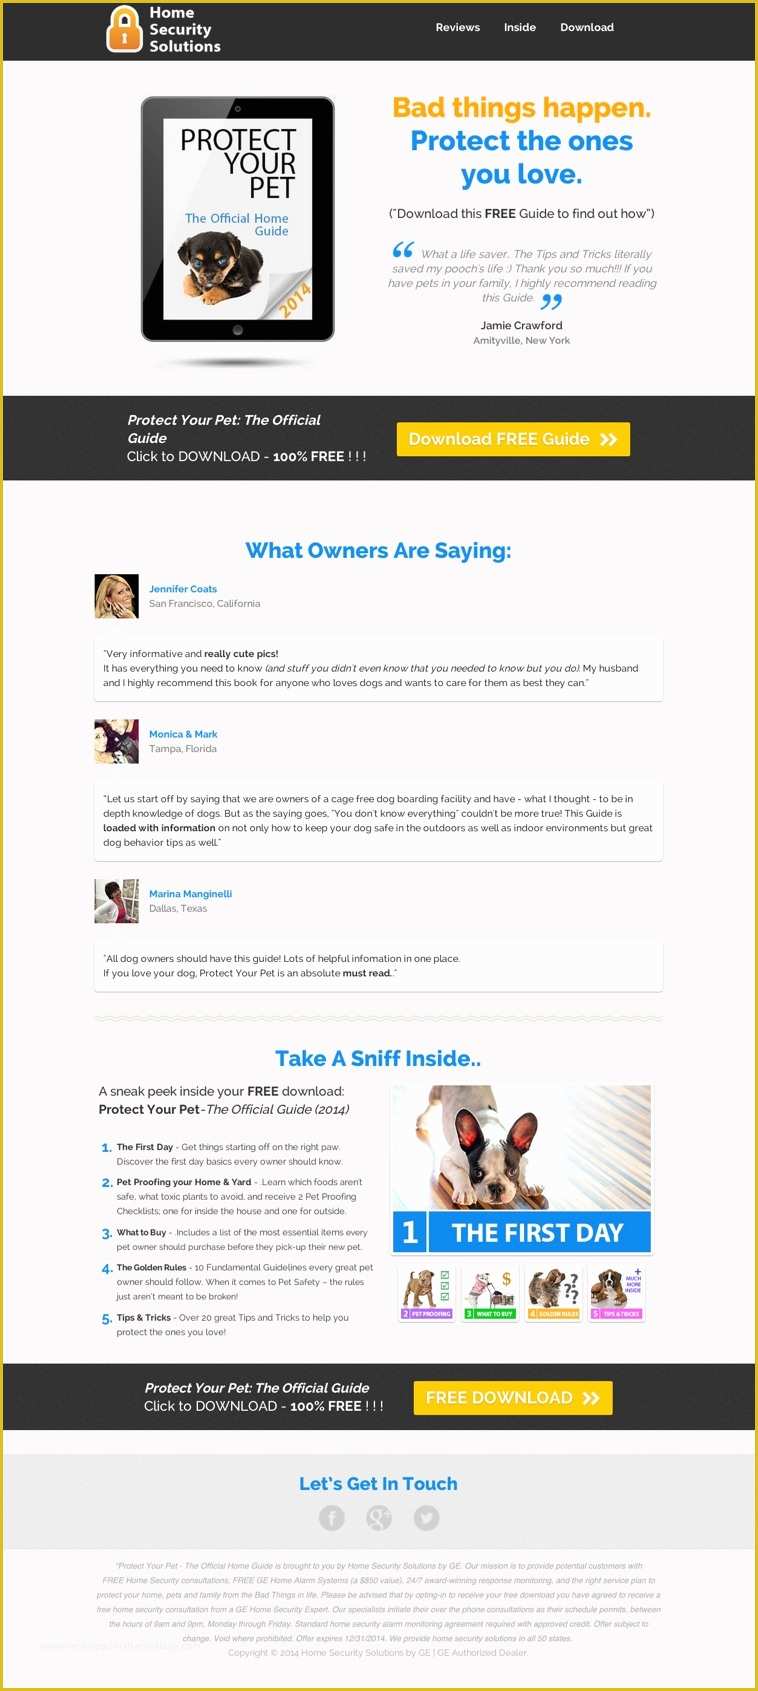 Leadpages Free Templates Of Landing Page Roundup Our top 10 Pages for October